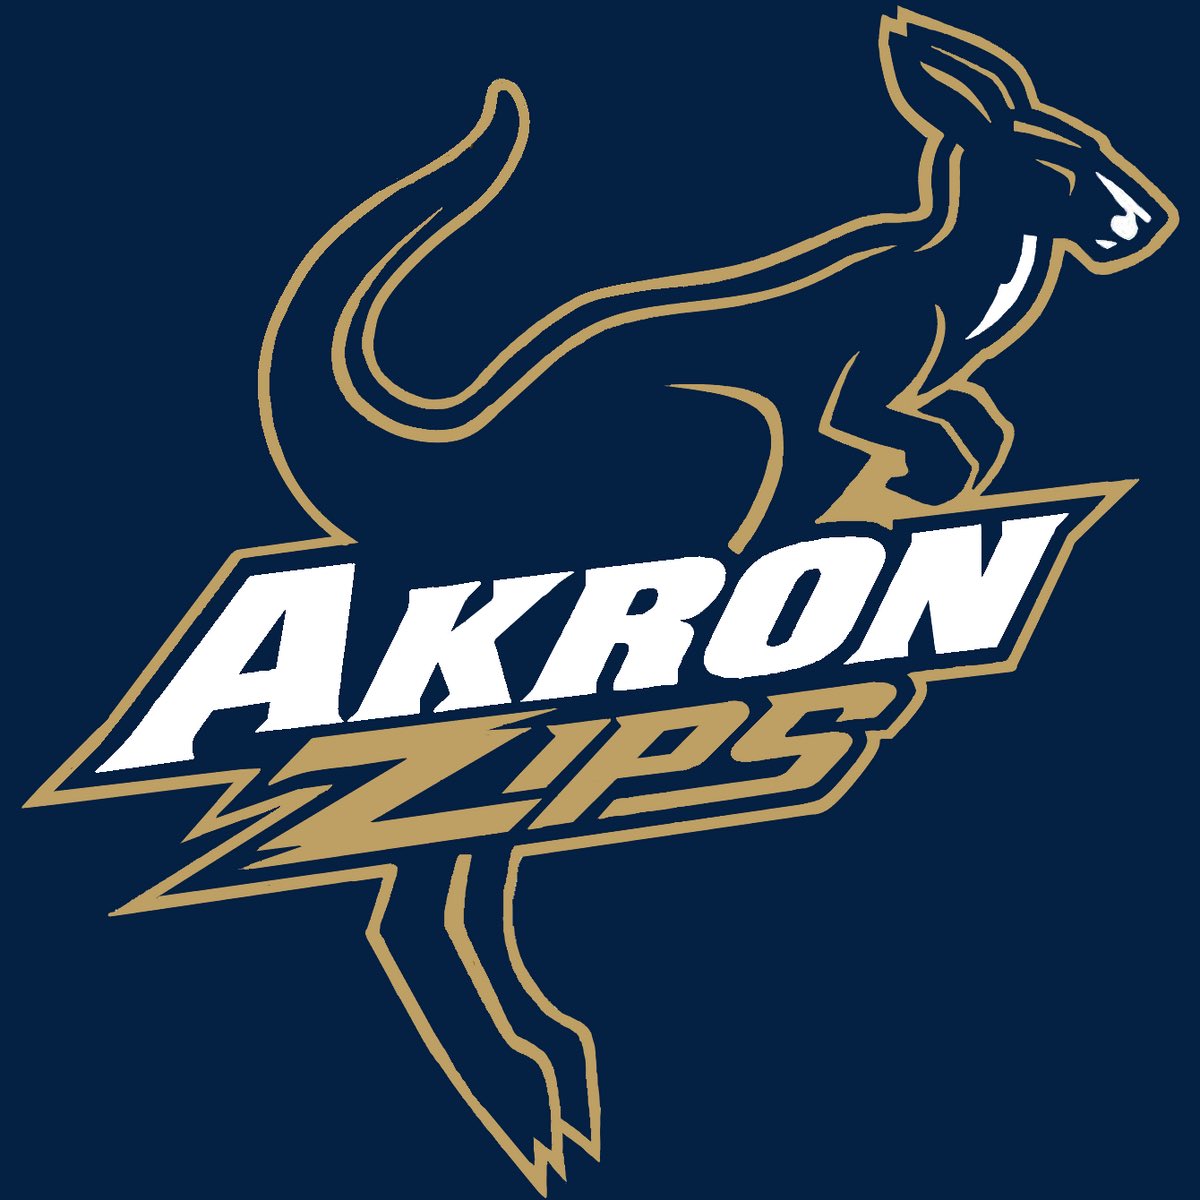 Blessed to be re-offered by The University of Akron🦘 @CoachReed__ @ZipsFB @haywoodtomcats @CoachPuckett25 @Njharris12 @timseymour62